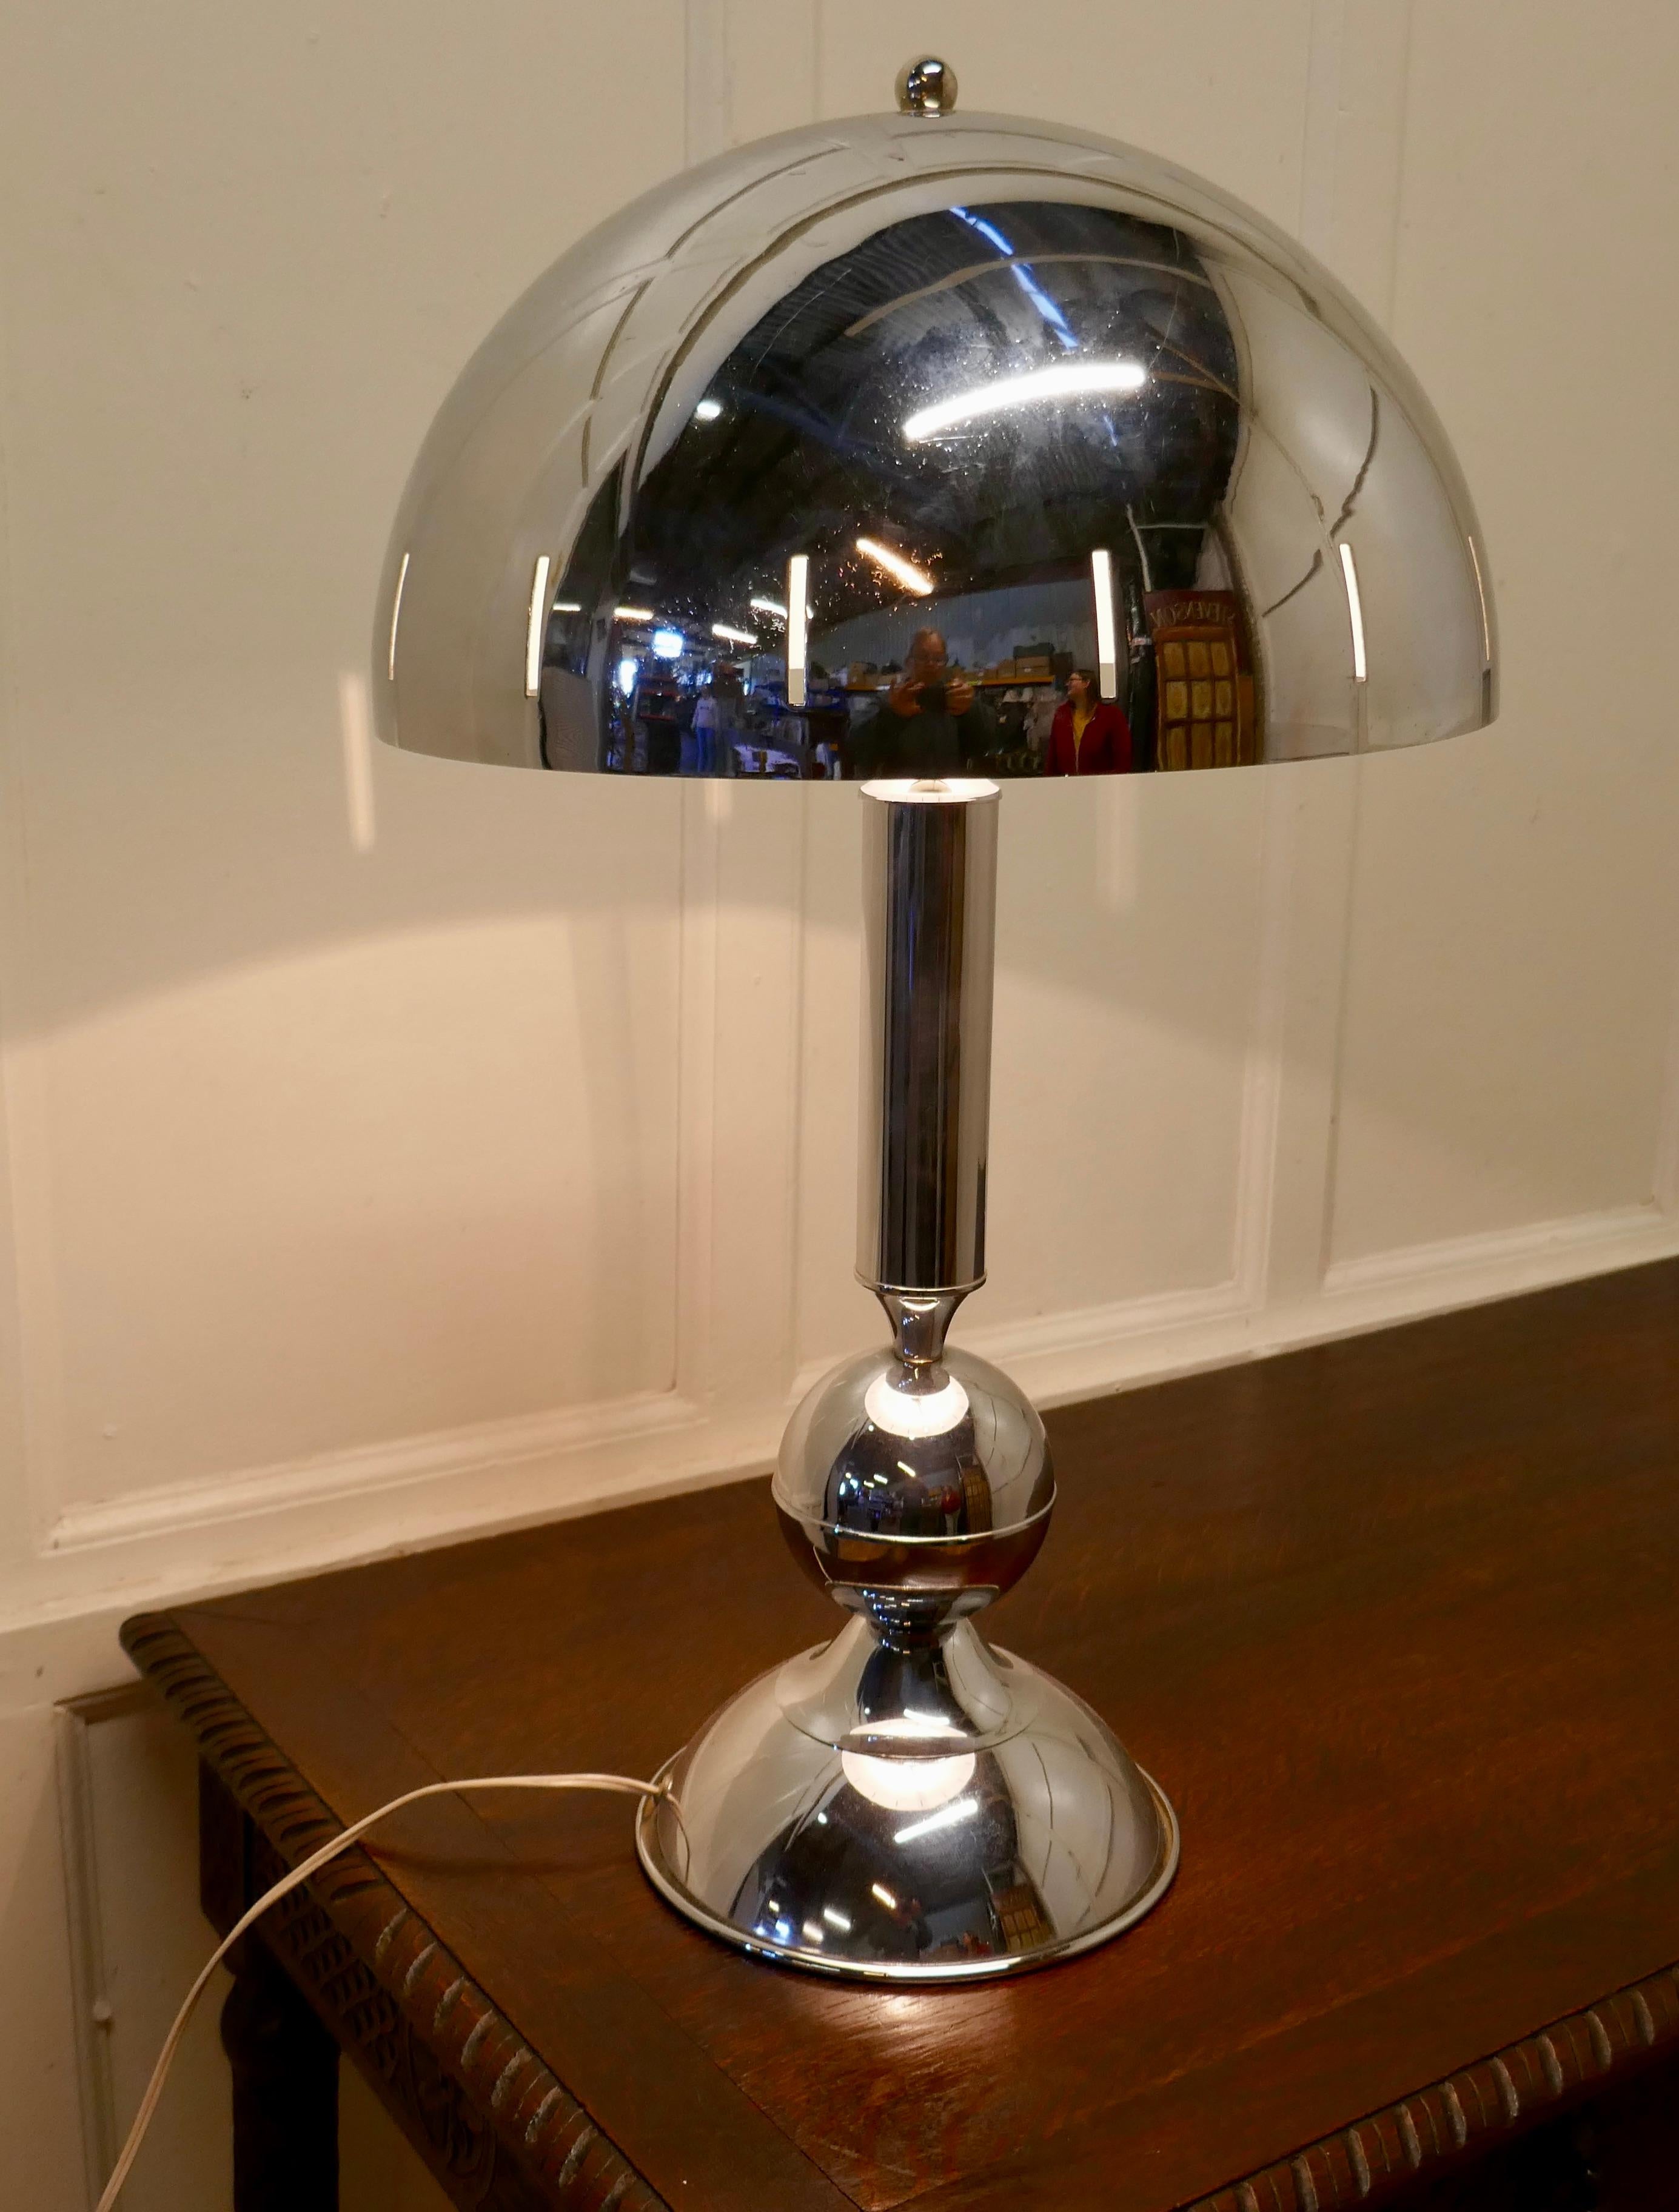 Large French chrome retro style table lamp

Very stylish statement piece in dynamic chrome, with a large mushroom shaped shade and a tall central column
The lamp is 27” tall, and 16” in diameter
WD67.